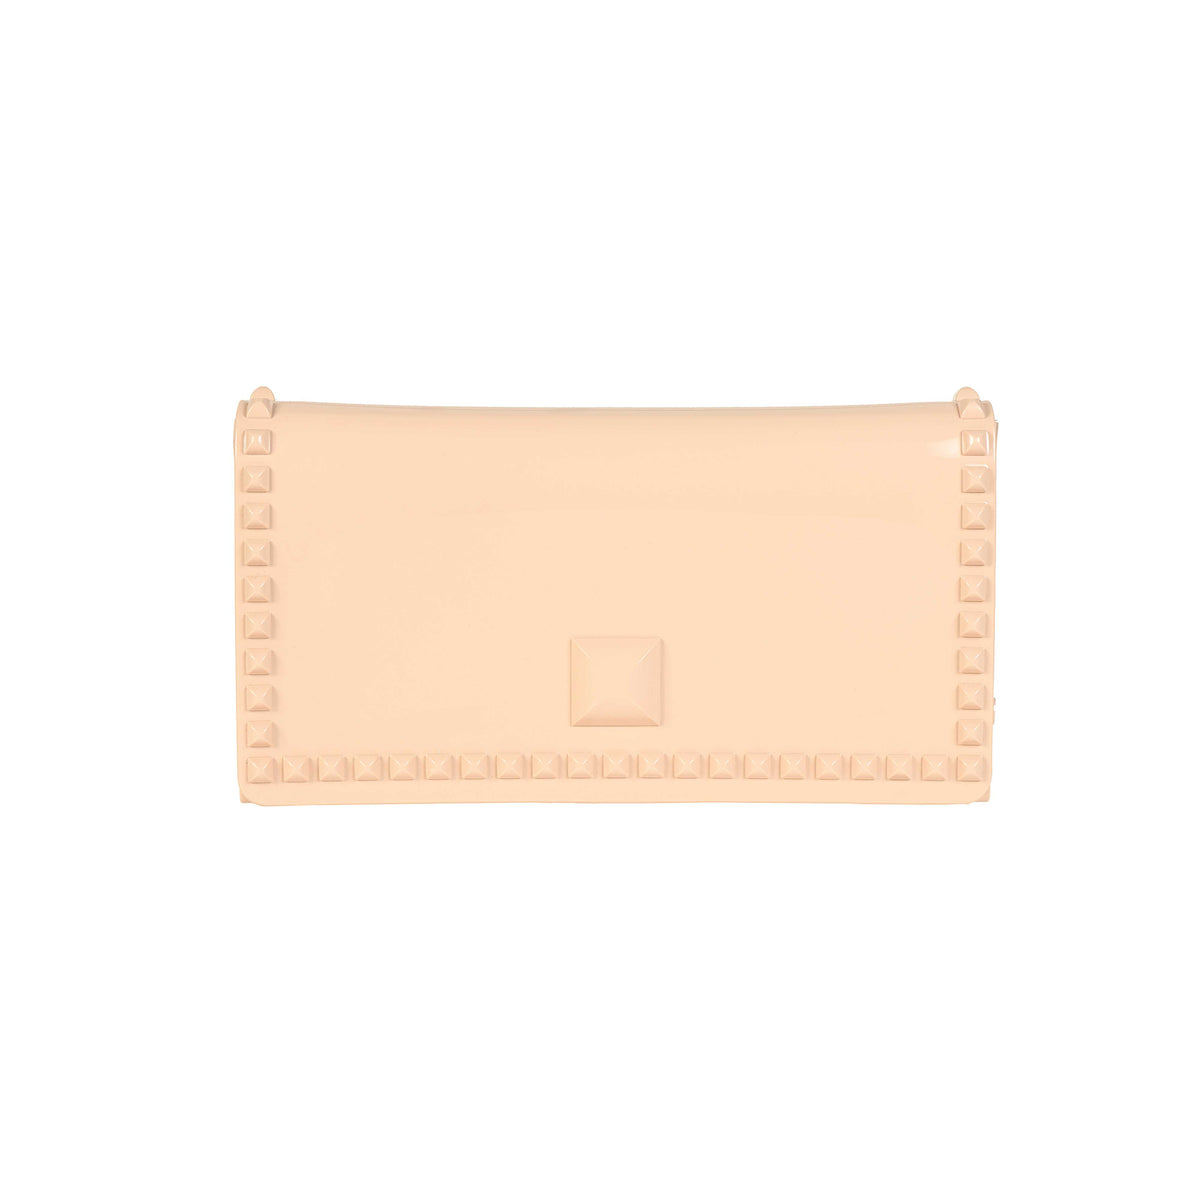 Nora flap beach purse which is waterproof with snap closure